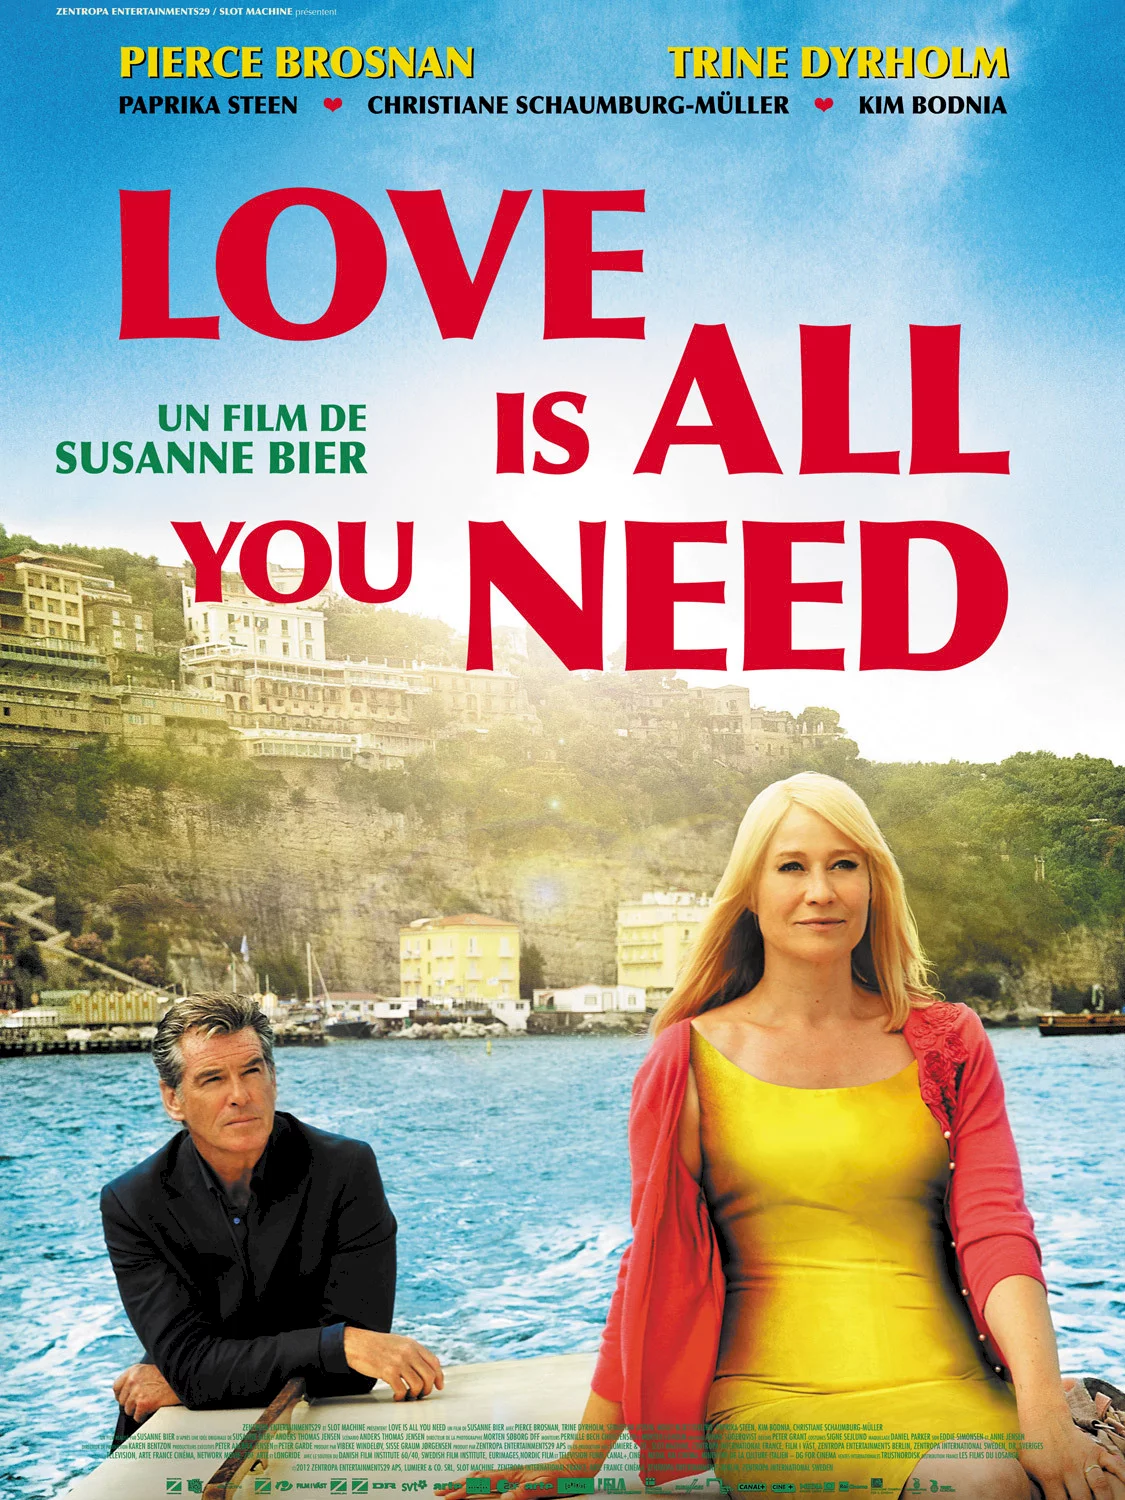 Photo 1 du film : All you need is love